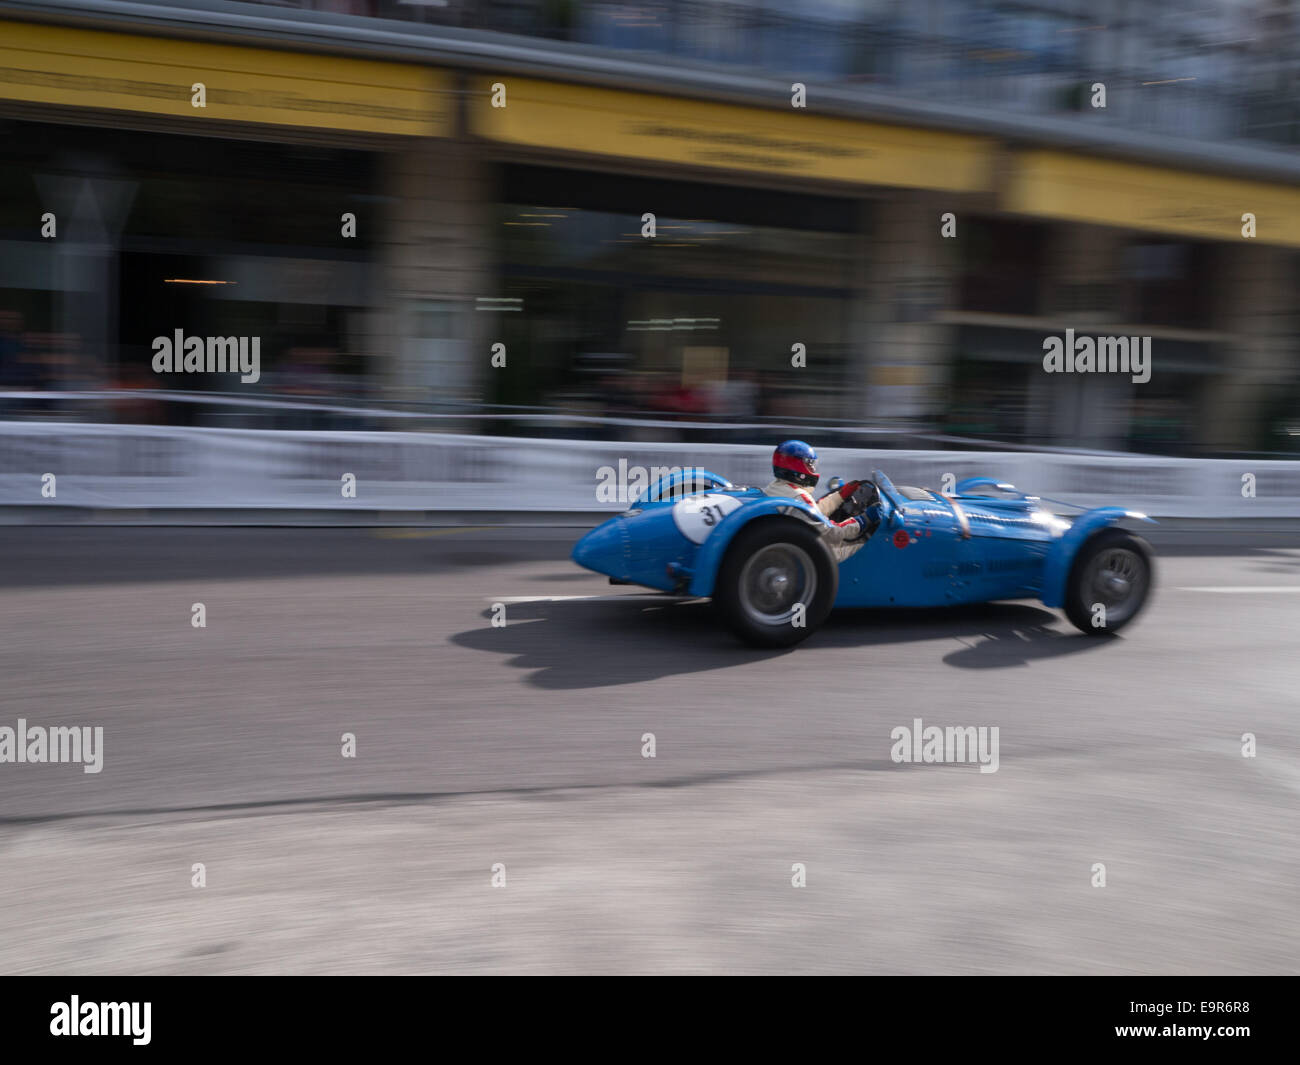 A blue racing car driving quickly on a public road Stock Photo